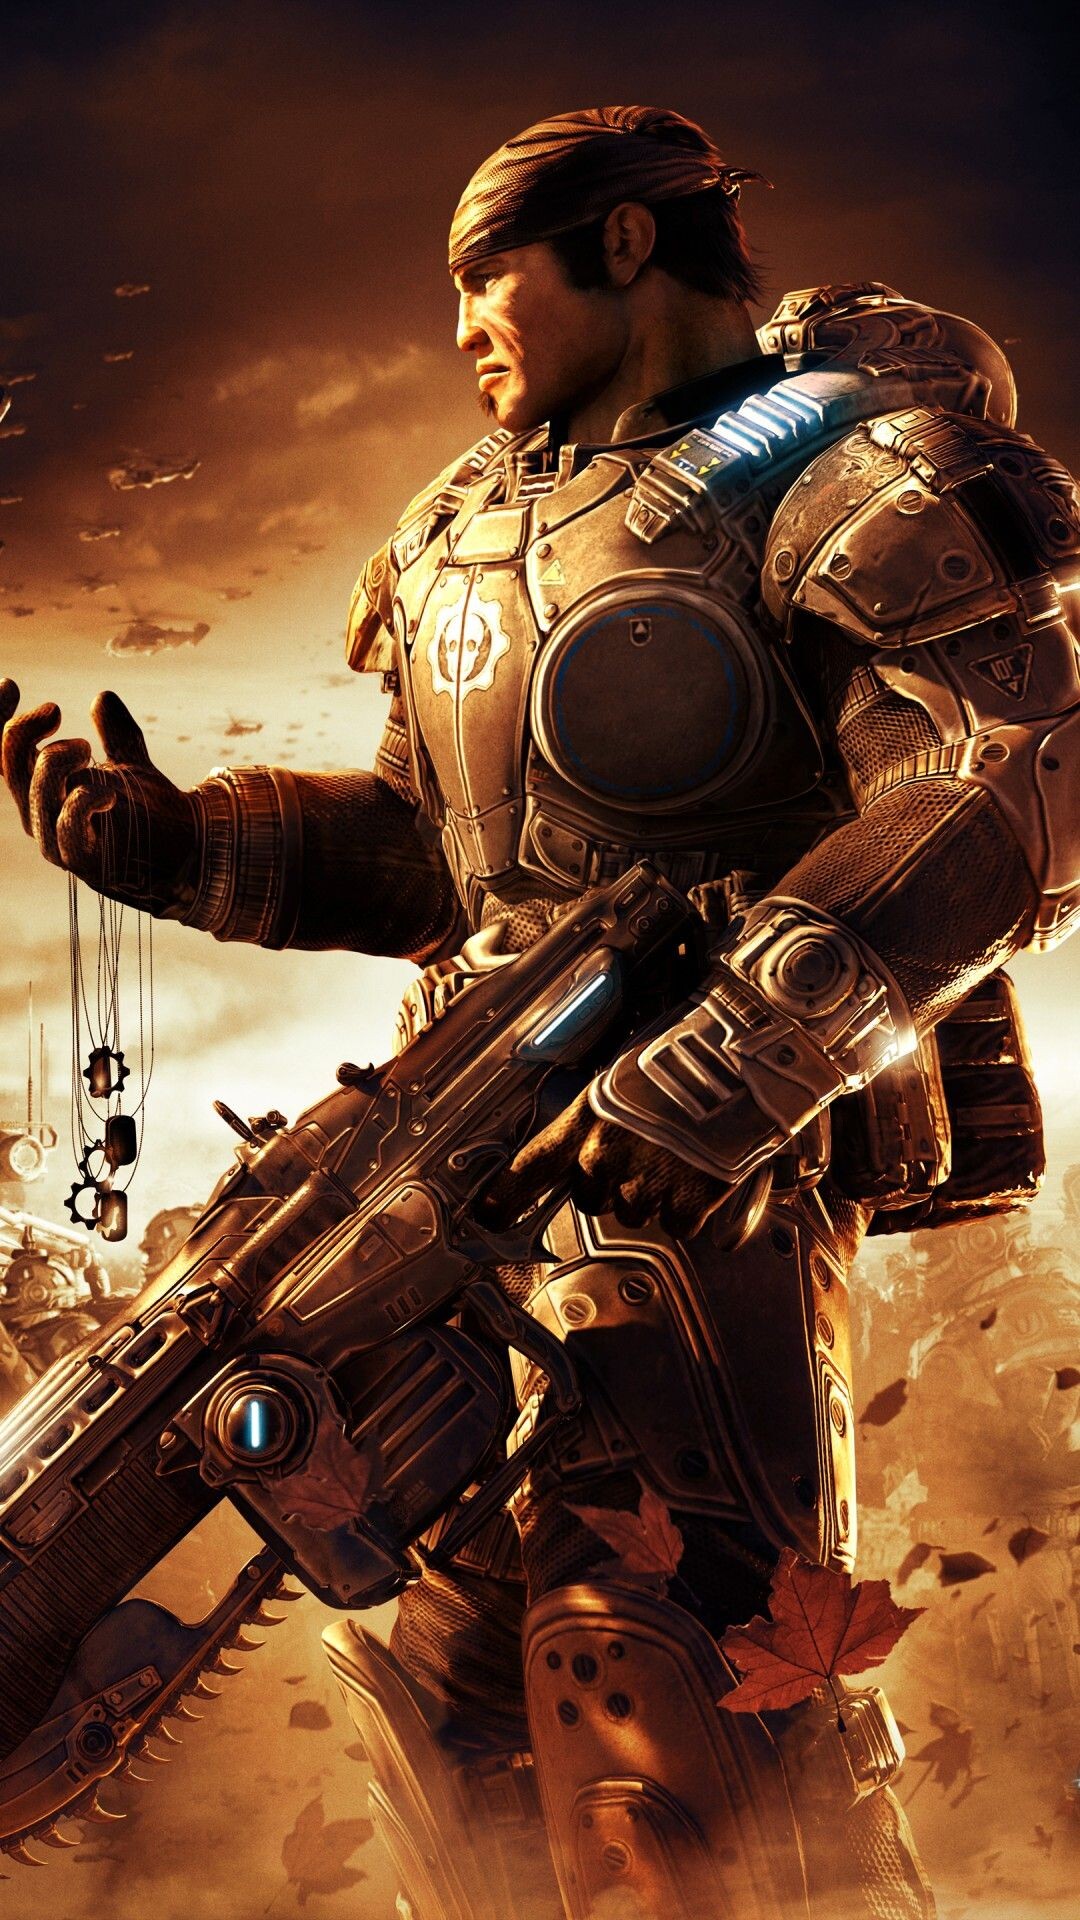 Gears of War: Marcus Fenix, Hope runs deep, Second part of the Epic Games series. 1080x1920 Full HD Background.